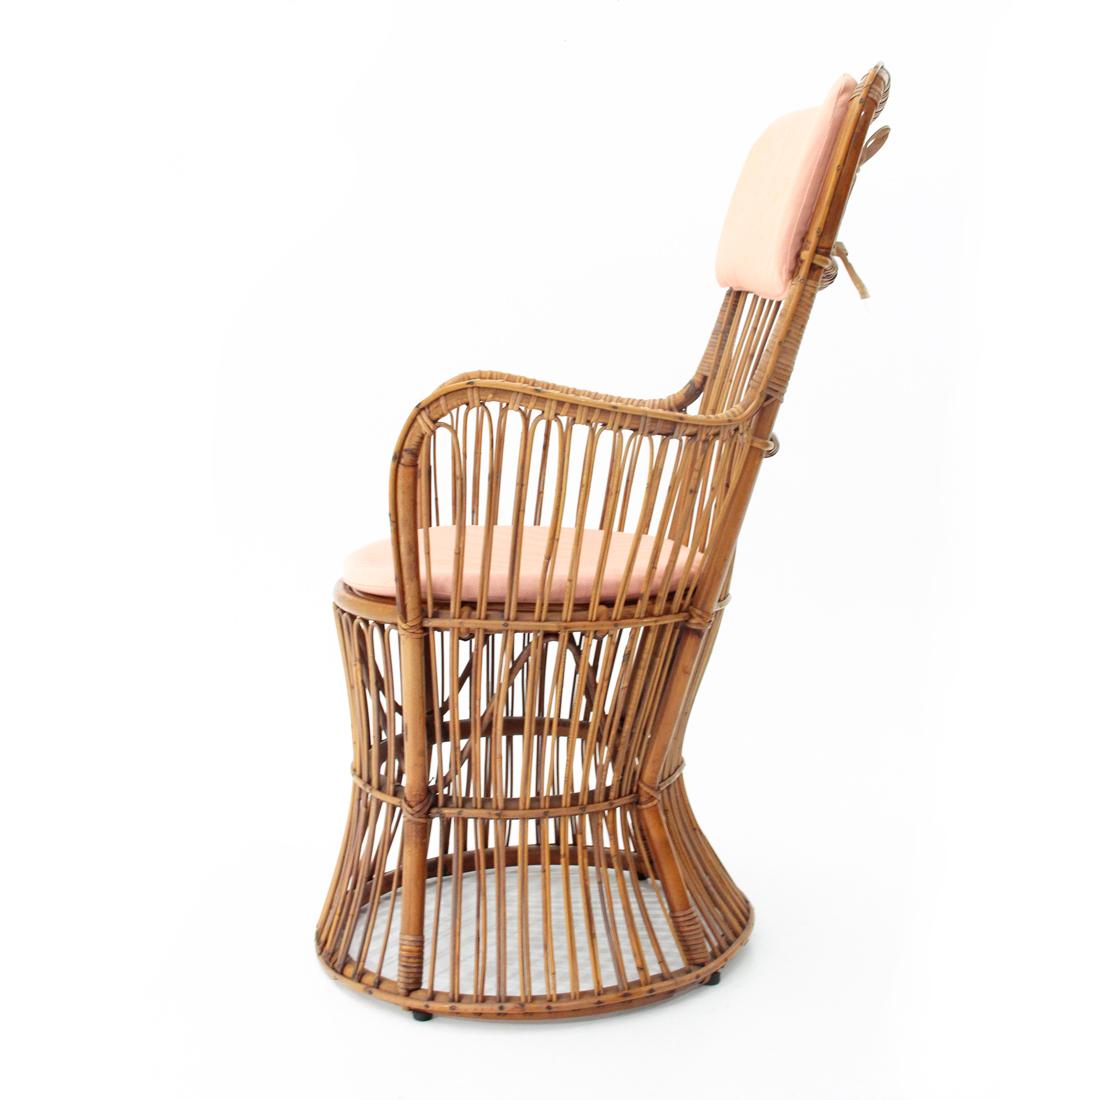 Italian Midcentury Rattan Armchair by Dal Vera, 1950s For Sale 1